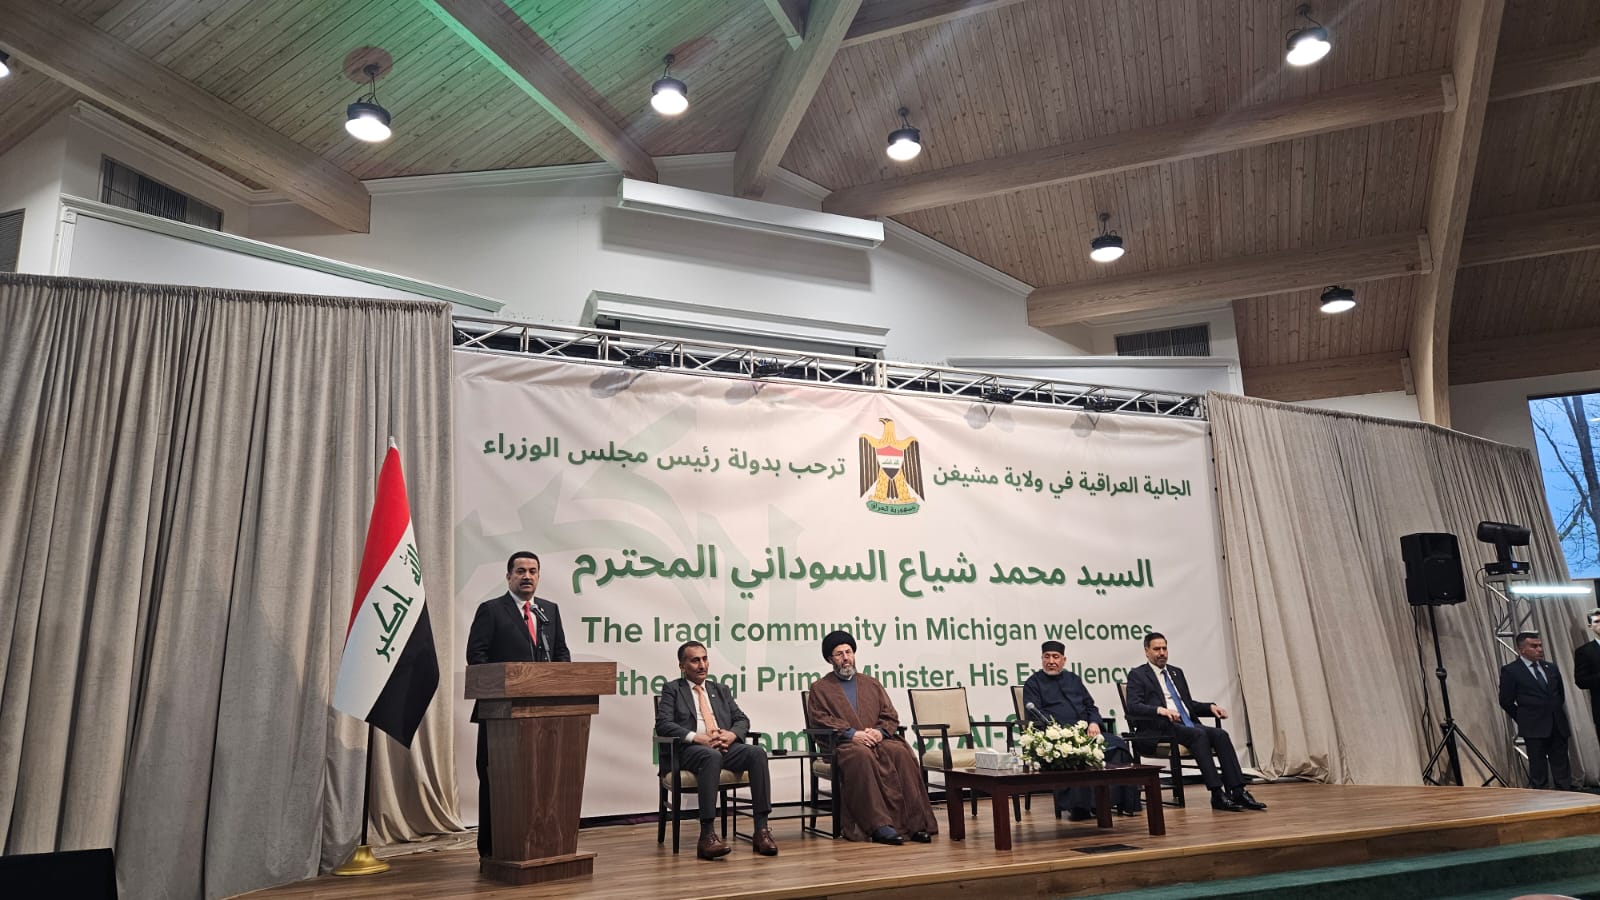 Iraqi prime minister al-Sudani speaks at the Islamic Institute of America mosque in Dearborn Heights on Thursday, April 18. – Photo by The Arab American News